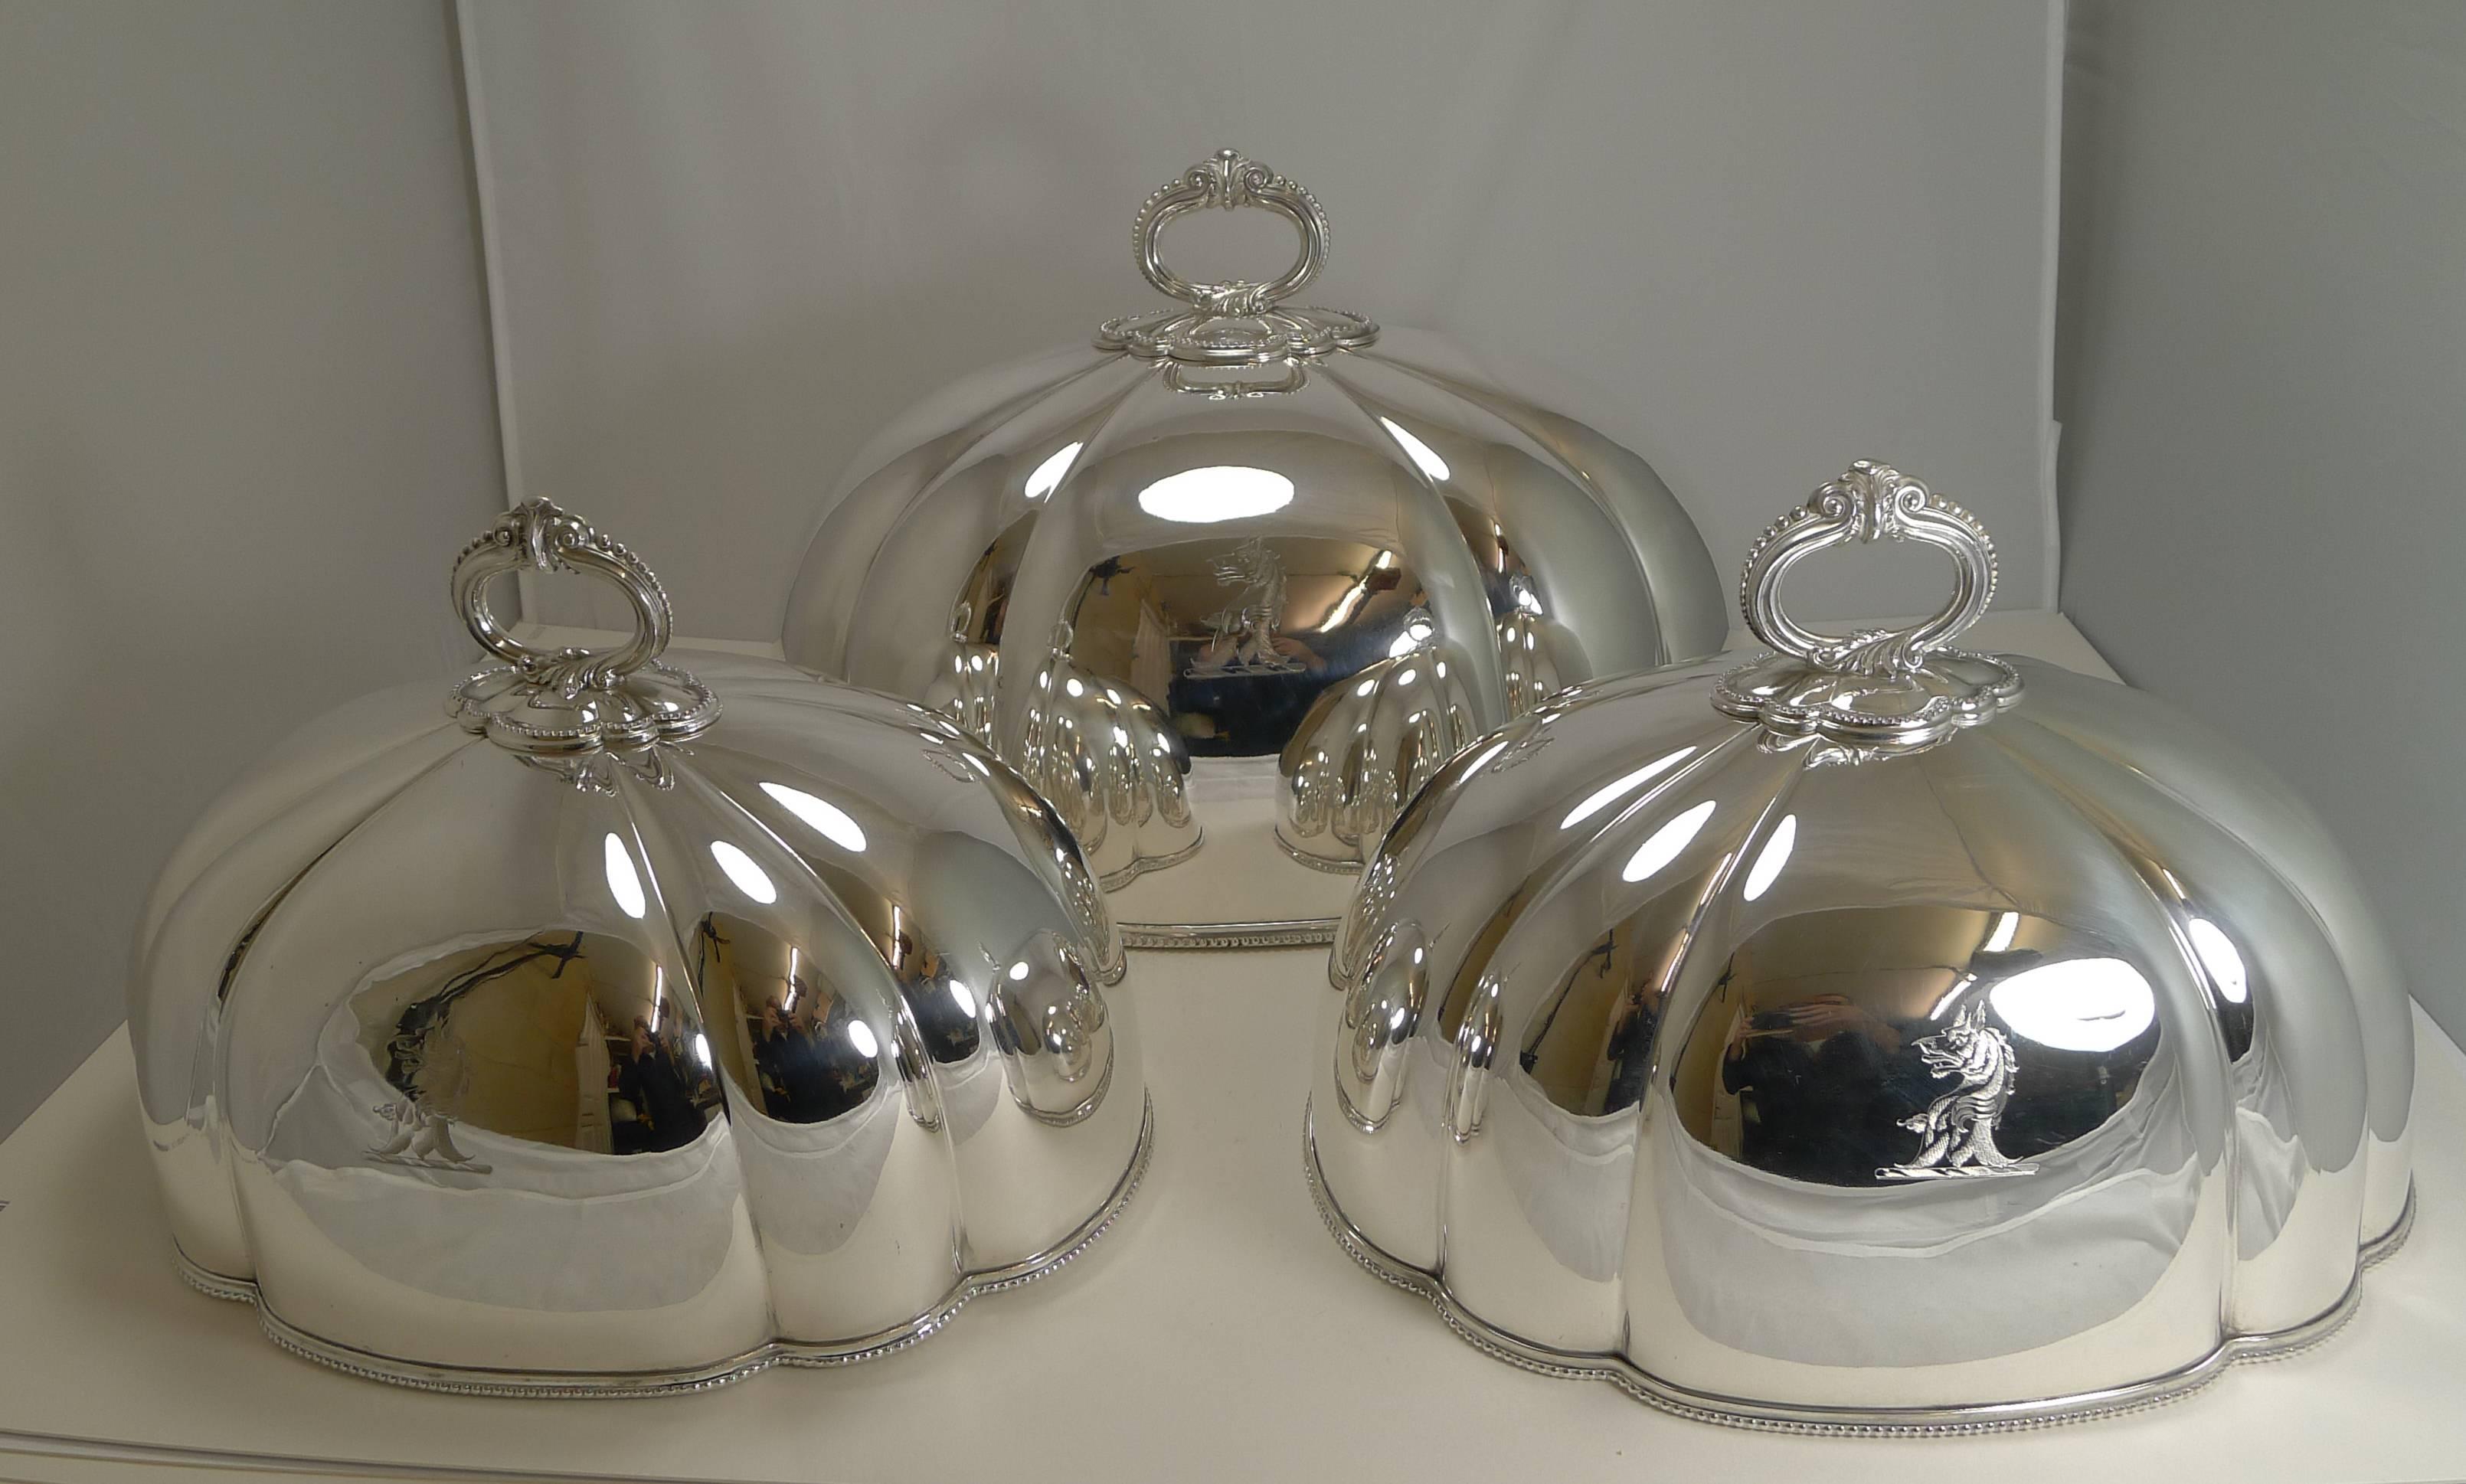 Silver Plate Set Three Antique English Meat or Food Domes by Martin Hall & Co. circa 1880